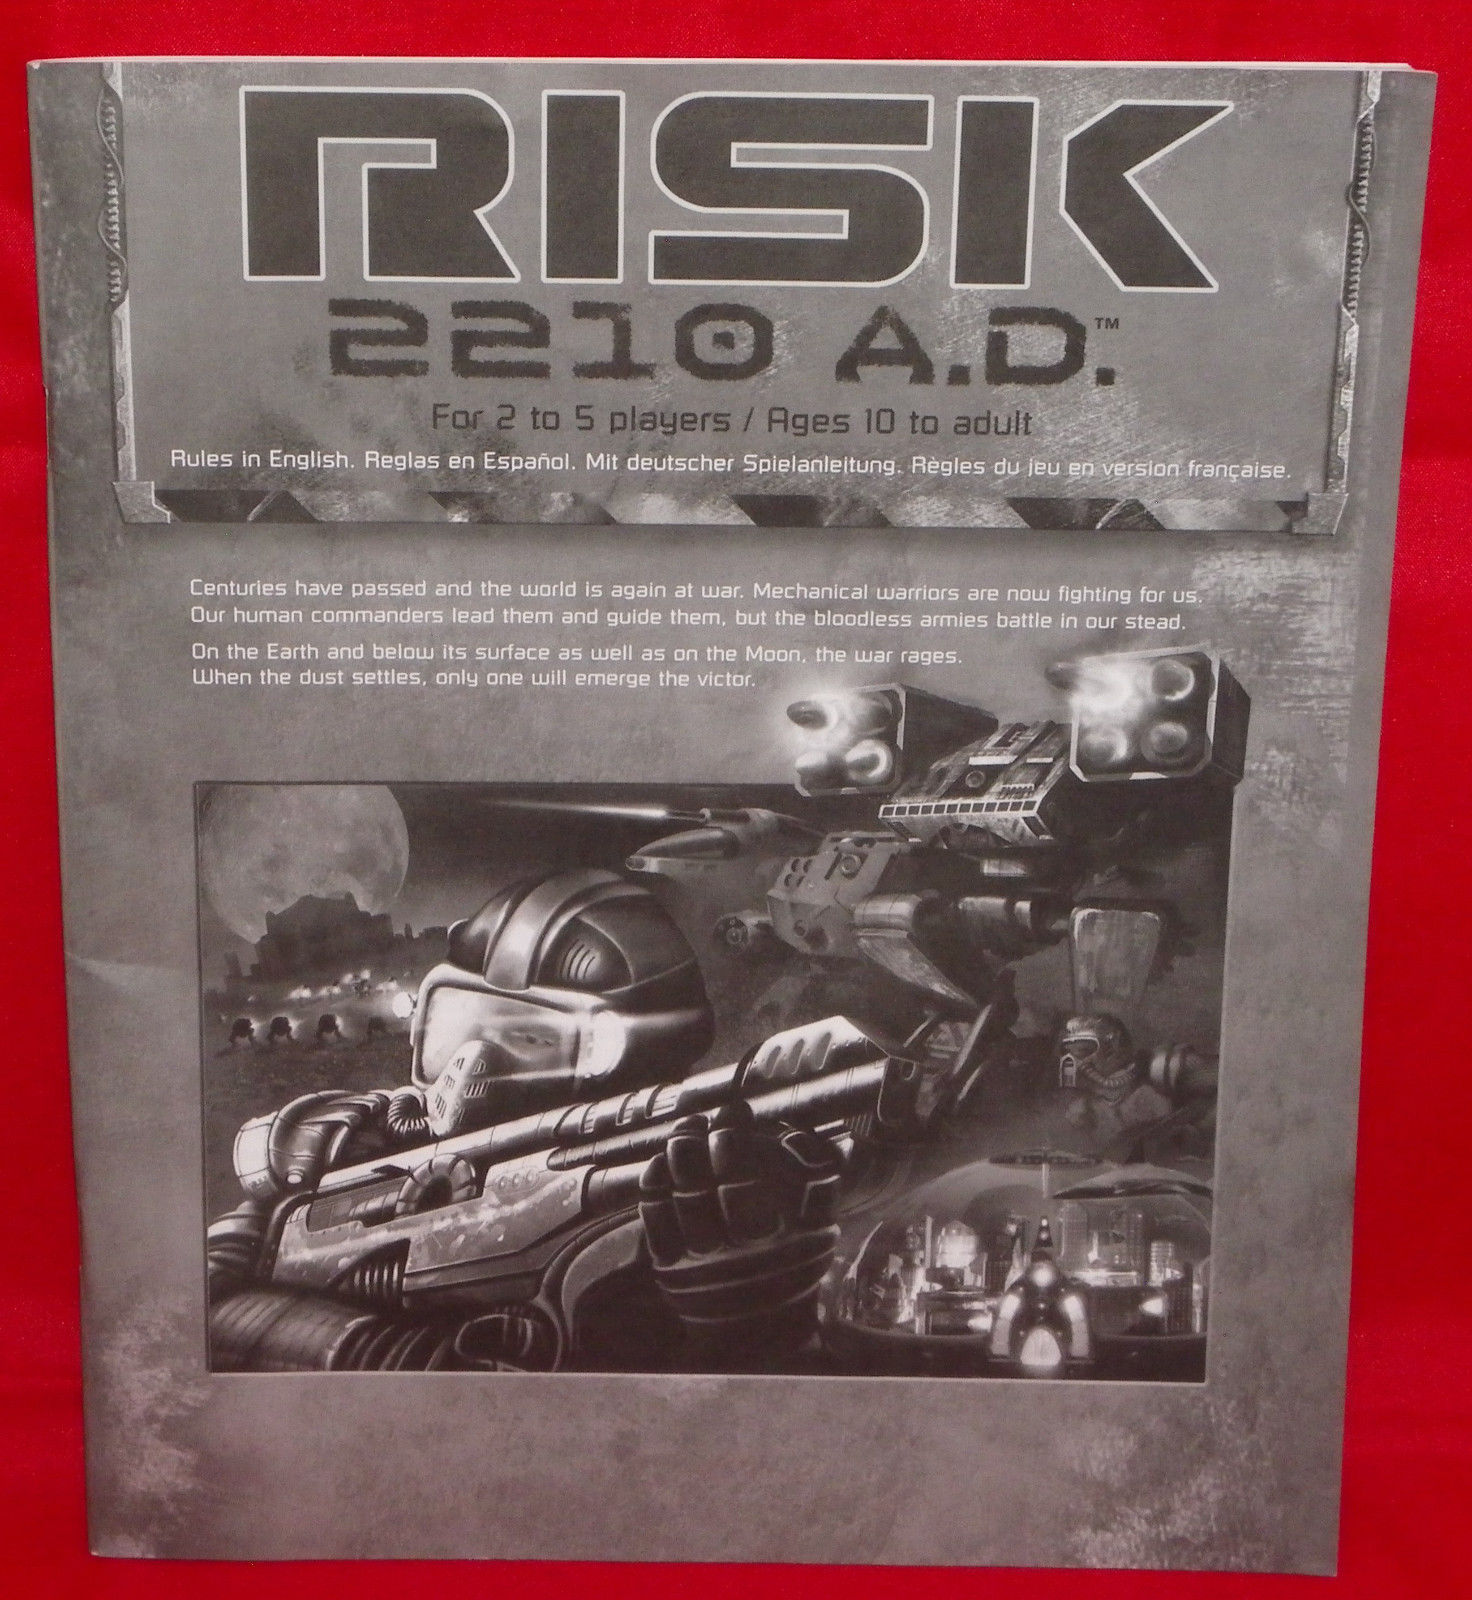 Risk 2210 A.D. Game Replacement Gameplay Manual Avalon Hill 2001 - $4.99